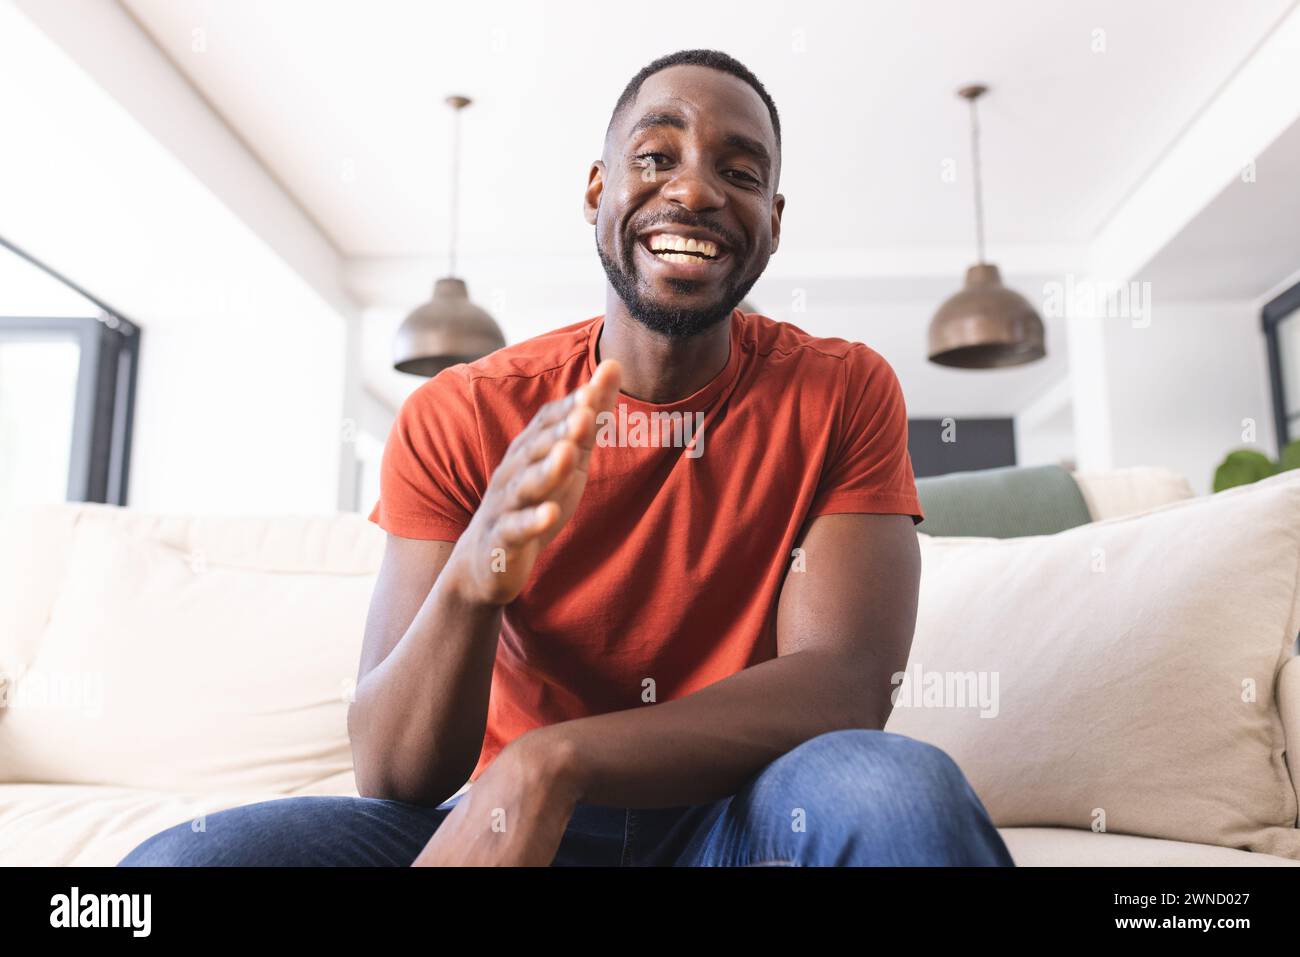 African American man in a red shirt is smiling and clapping on a video call Stock Photo